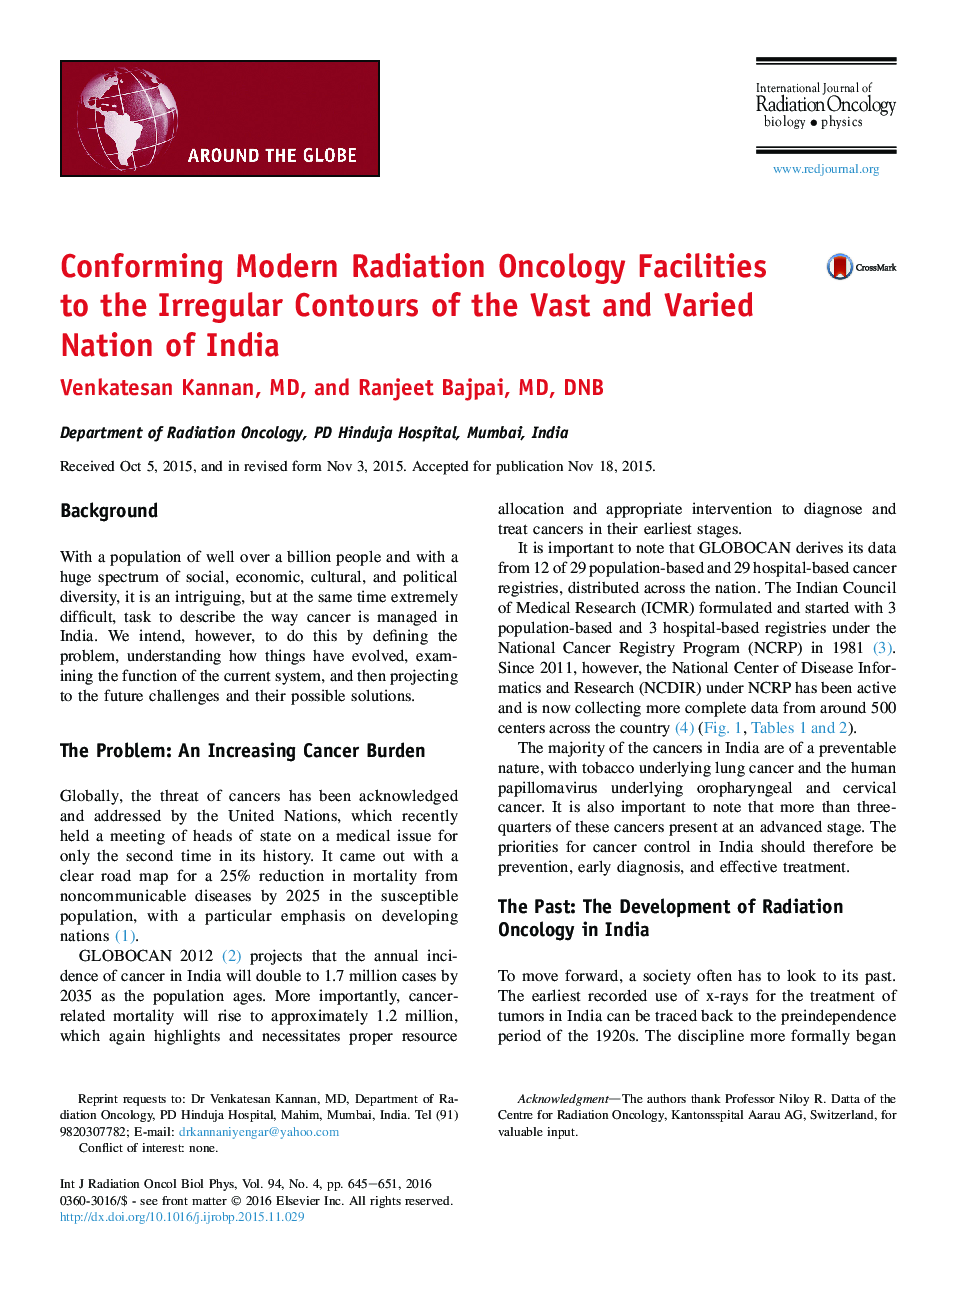 Conforming Modern Radiation Oncology Facilities toÂ the Irregular Contours of the Vast and Varied Nation of India